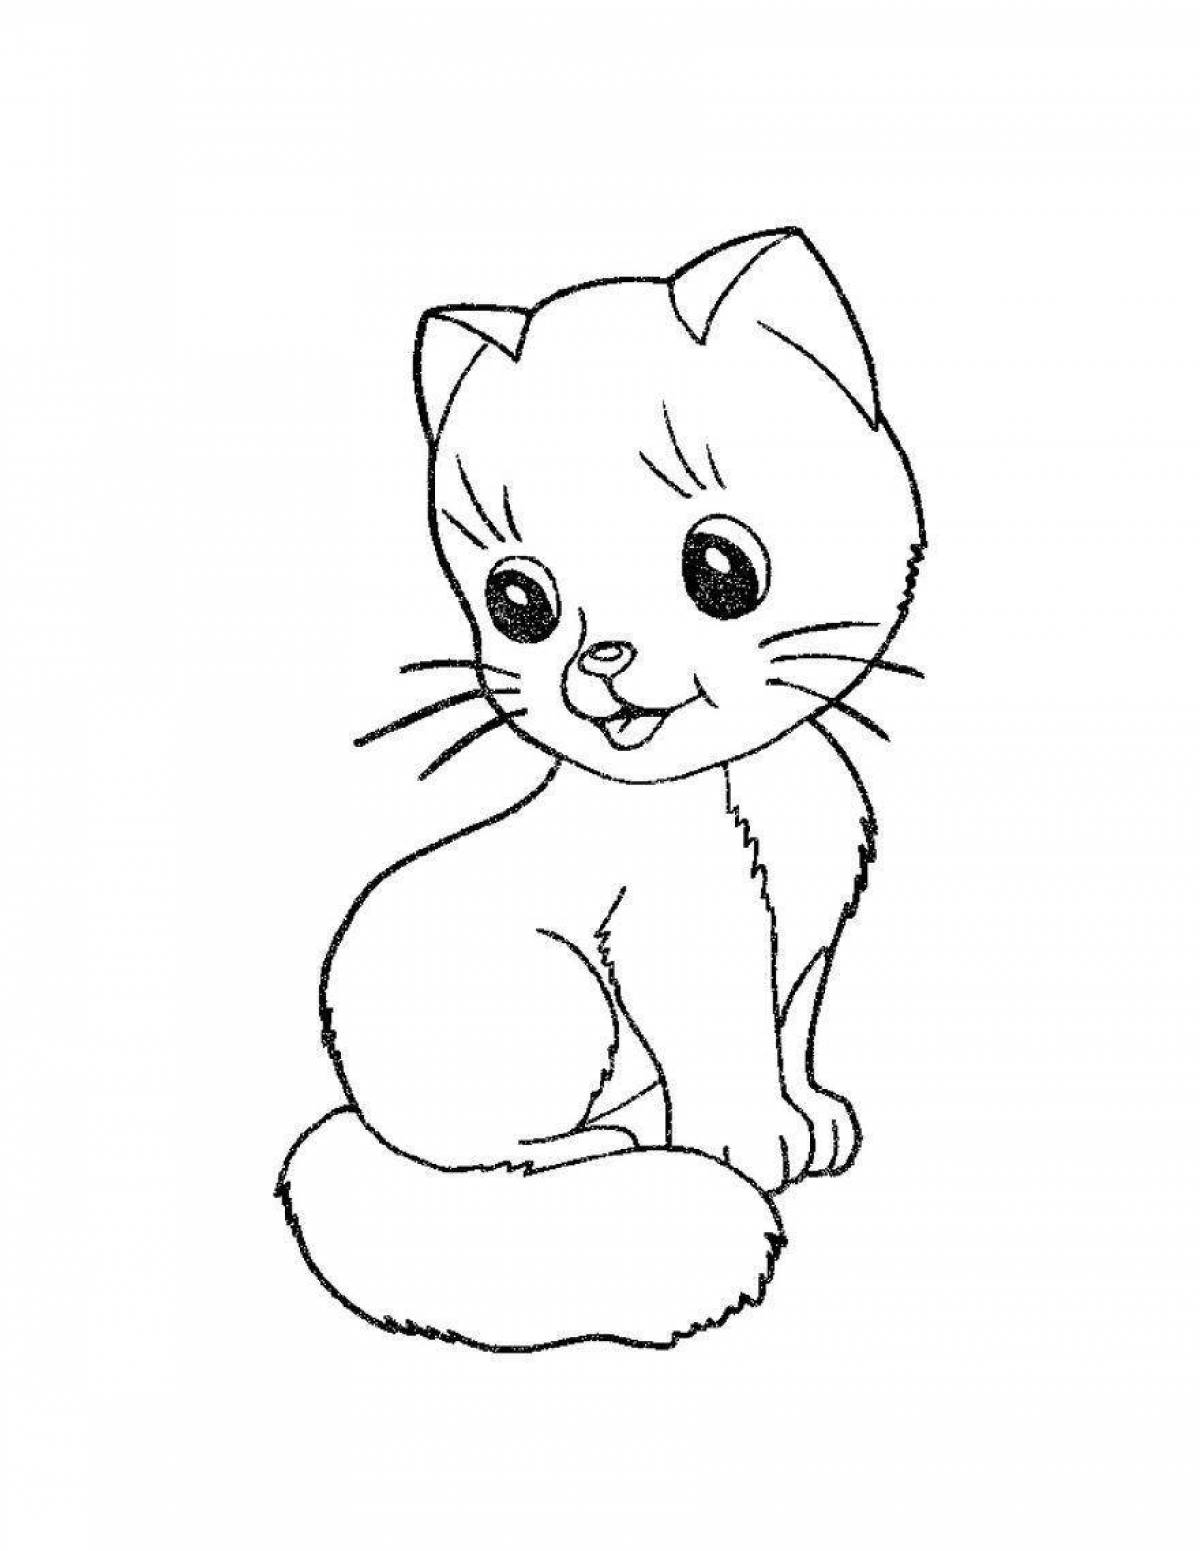 Friendly cat coloring page